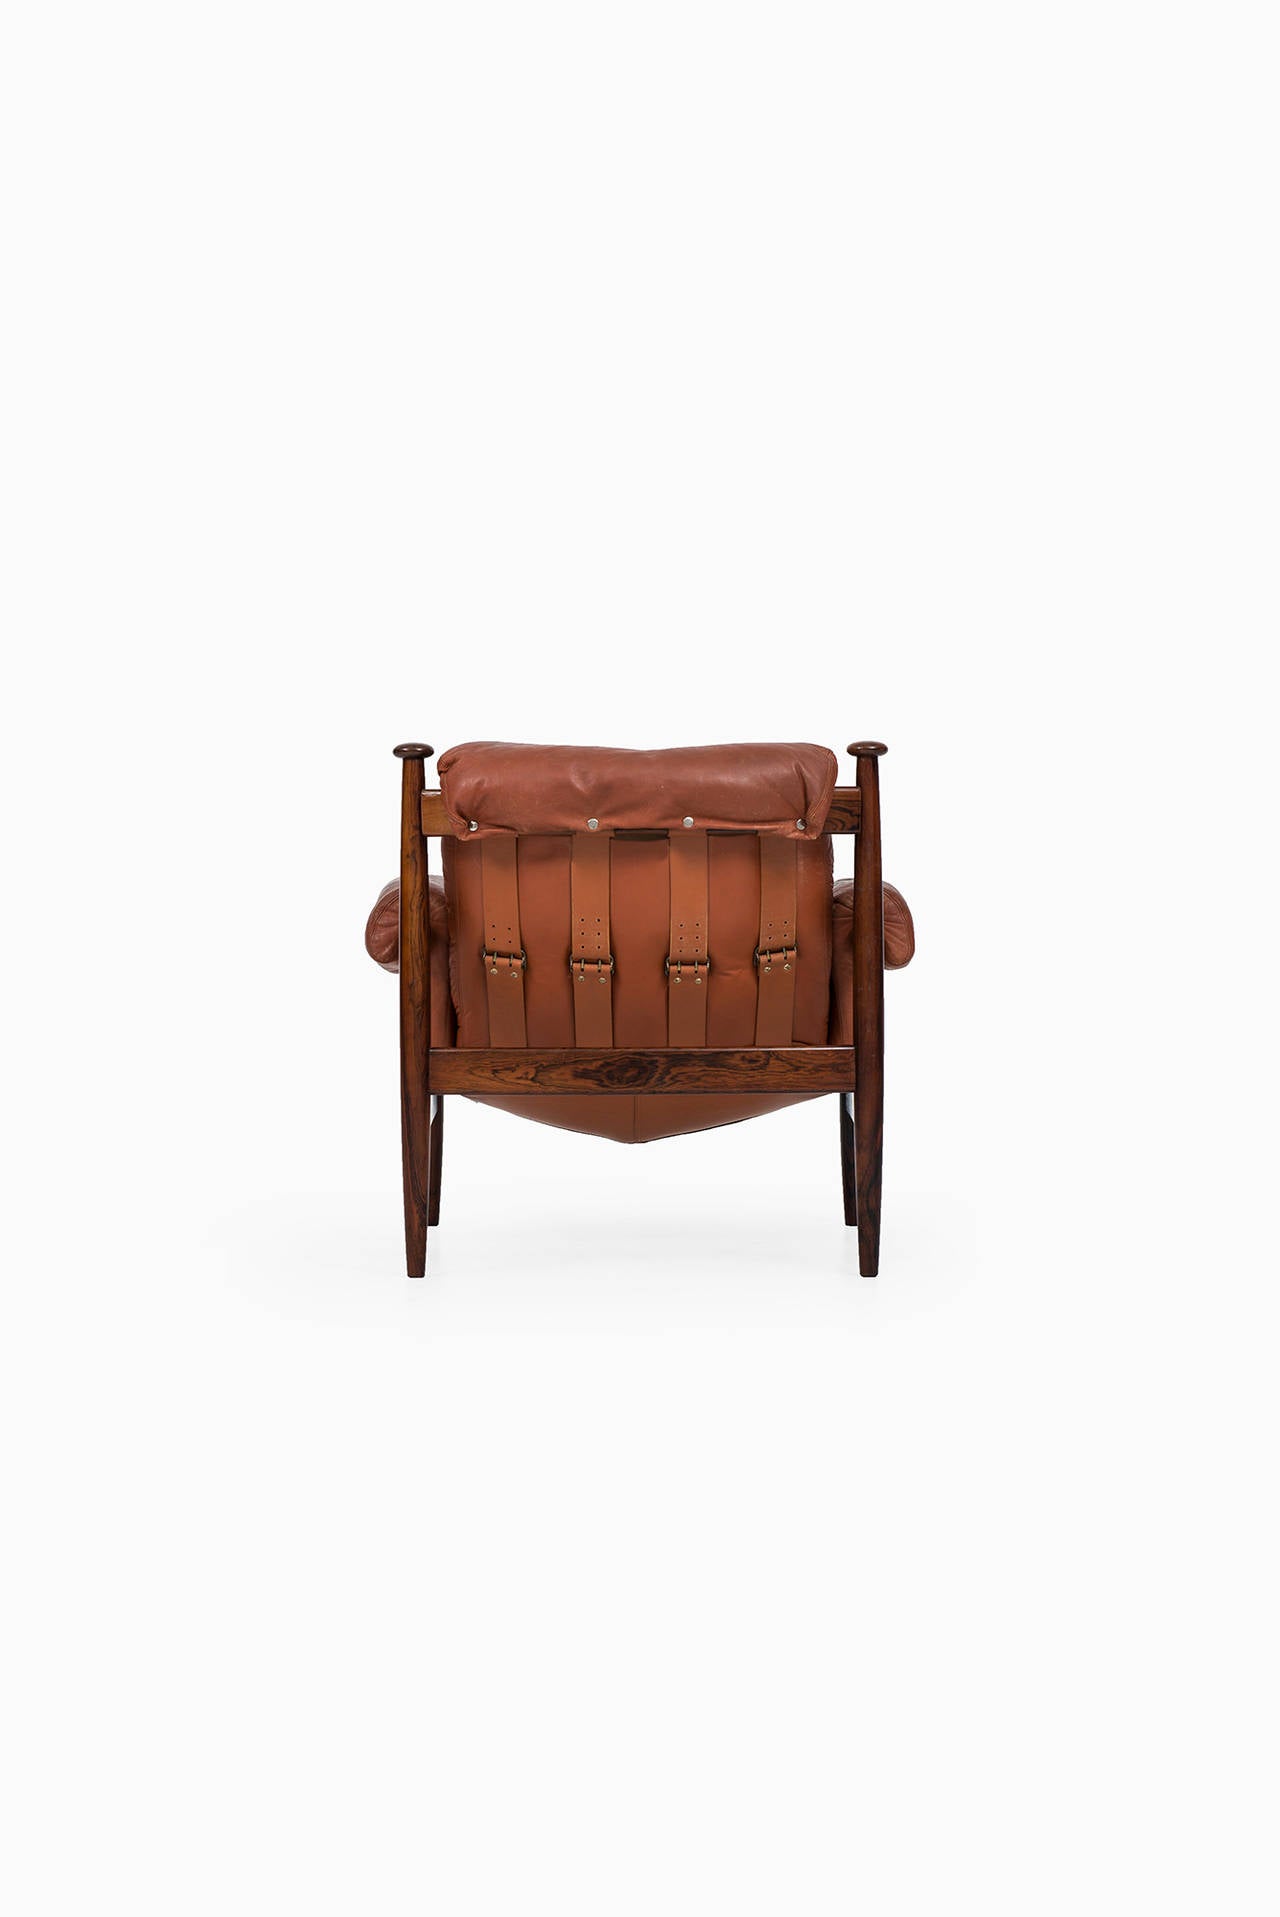 Mid-20th Century Safari chair in rosewood and red leather by Ire möbler in Sweden